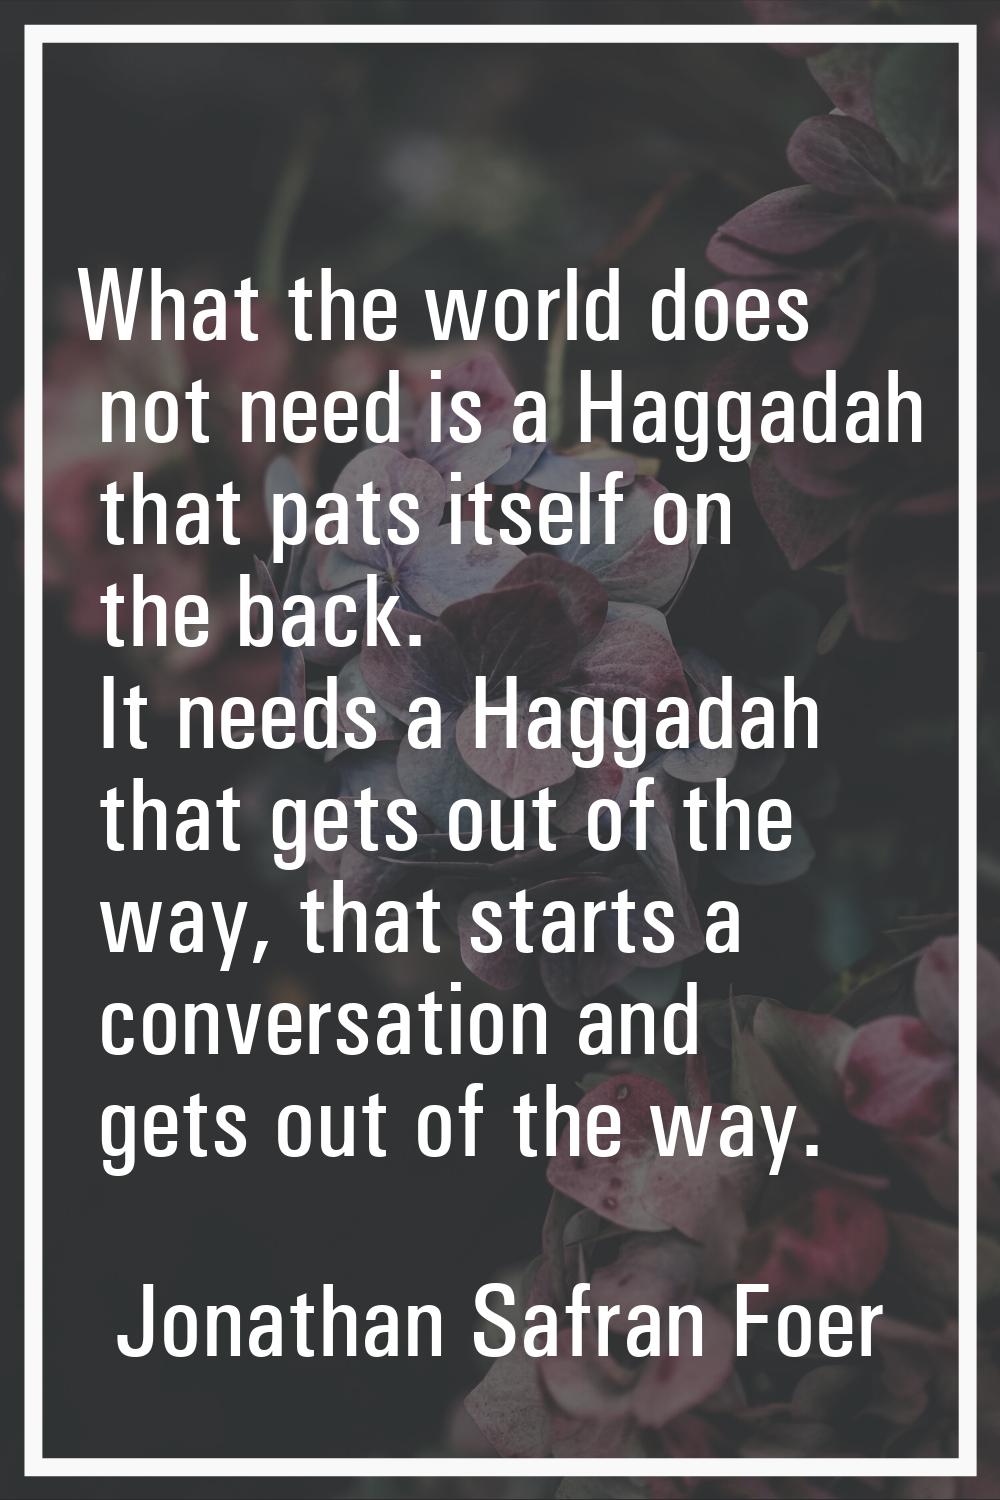 What the world does not need is a Haggadah that pats itself on the back. It needs a Haggadah that g